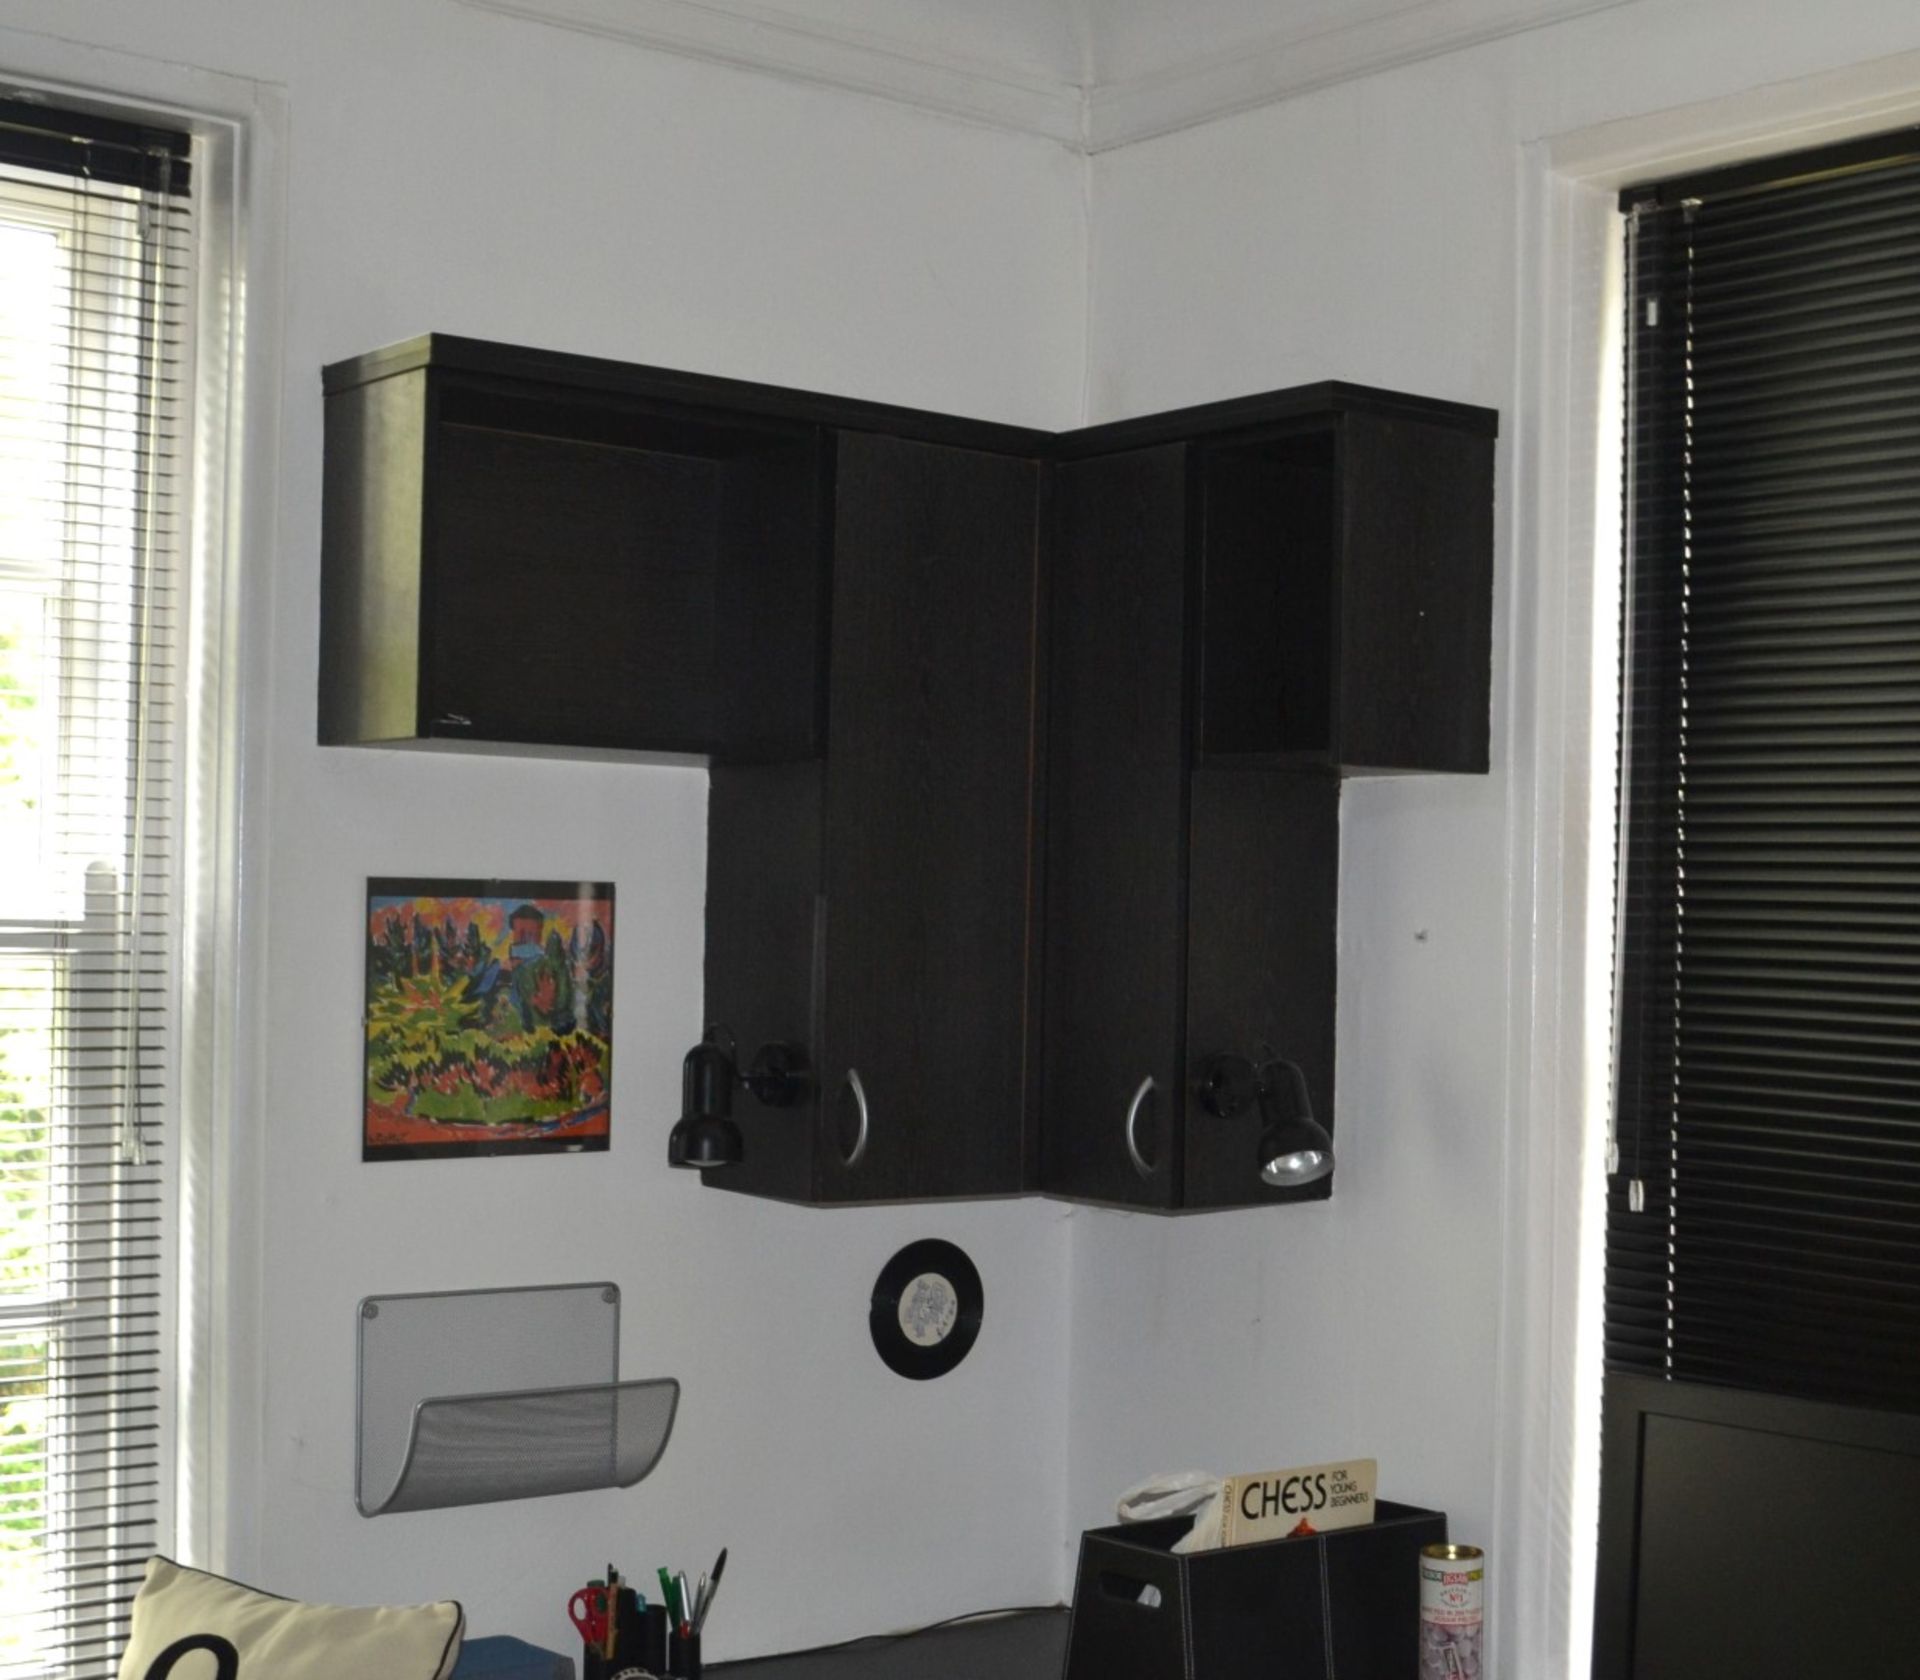 1 x Fitted Bedroom in Black including Bed, Wardrobes and Sink Unit - Lots of Units - CL321 - - Image 12 of 17